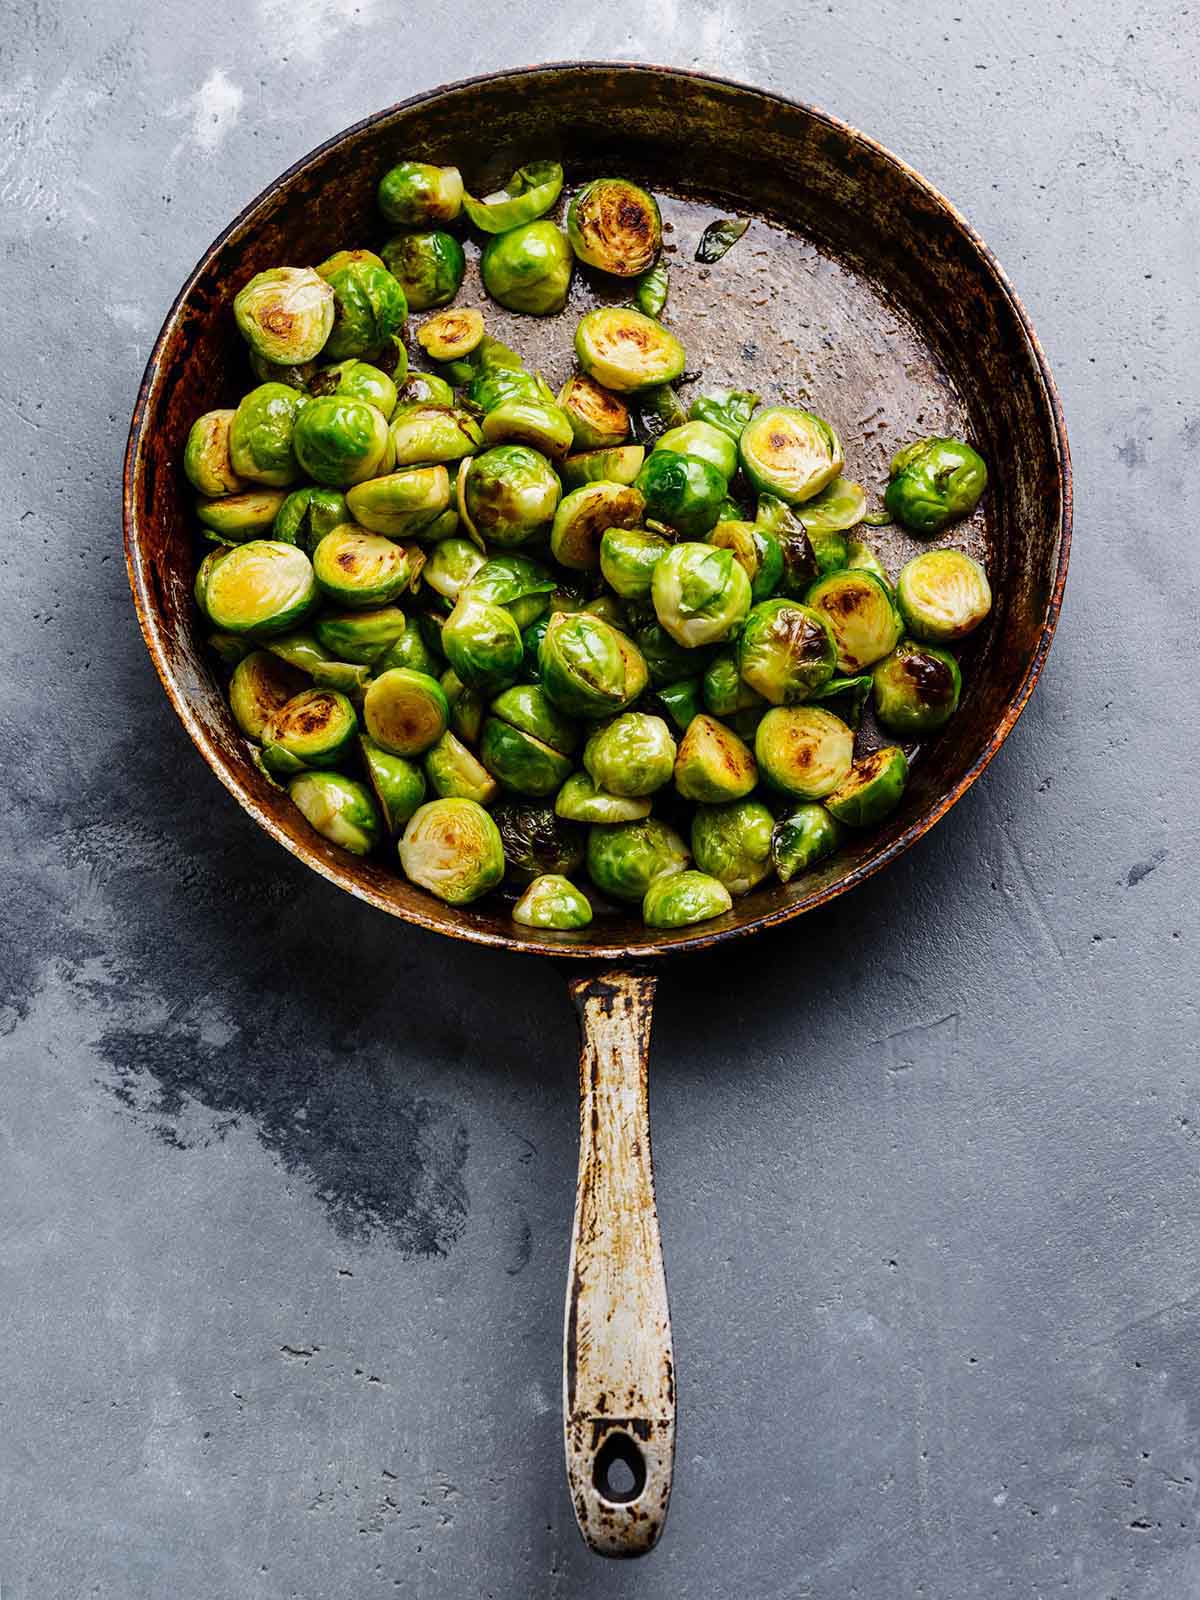 Fried Brussels sprouts in frying pan on concrete background